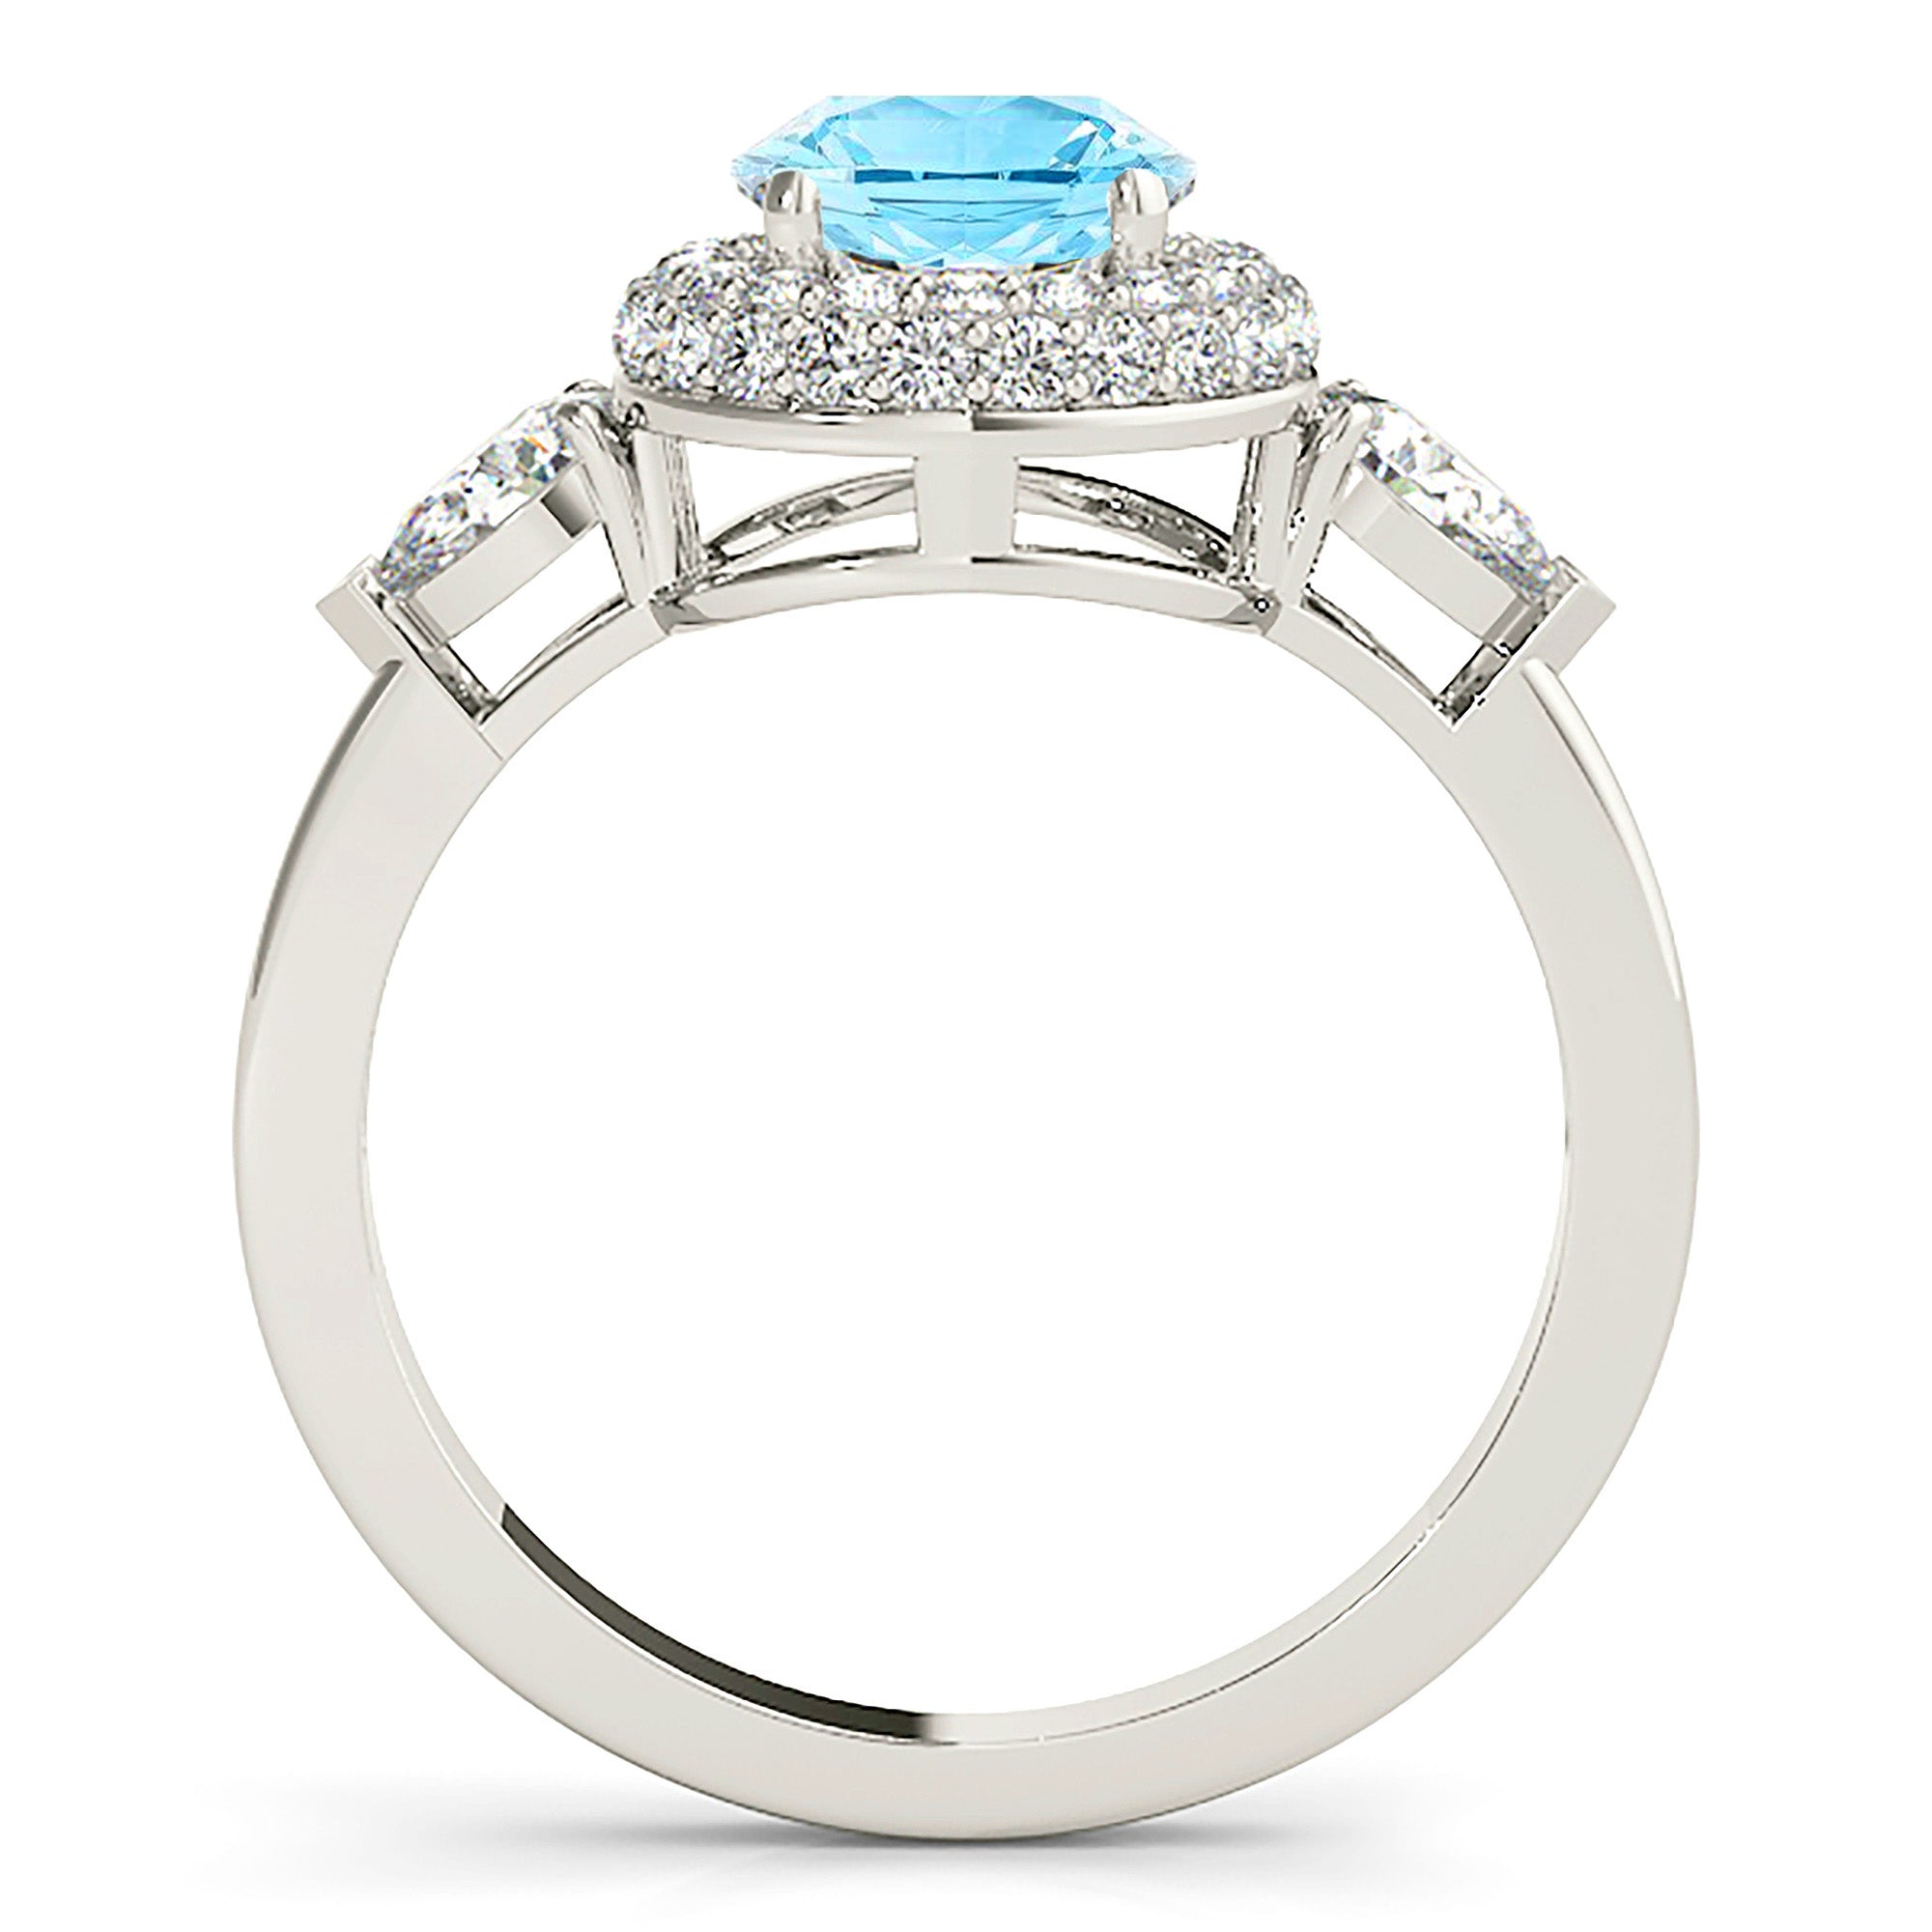 1.10 ct. Genuine Aquamarine Ring With 0.90 ctw. Diamond Double Edge Halo And Side Accent Diamonds-in 14K/18K White, Yellow, Rose Gold and Platinum - Christmas Jewelry Gift -VIRABYANI